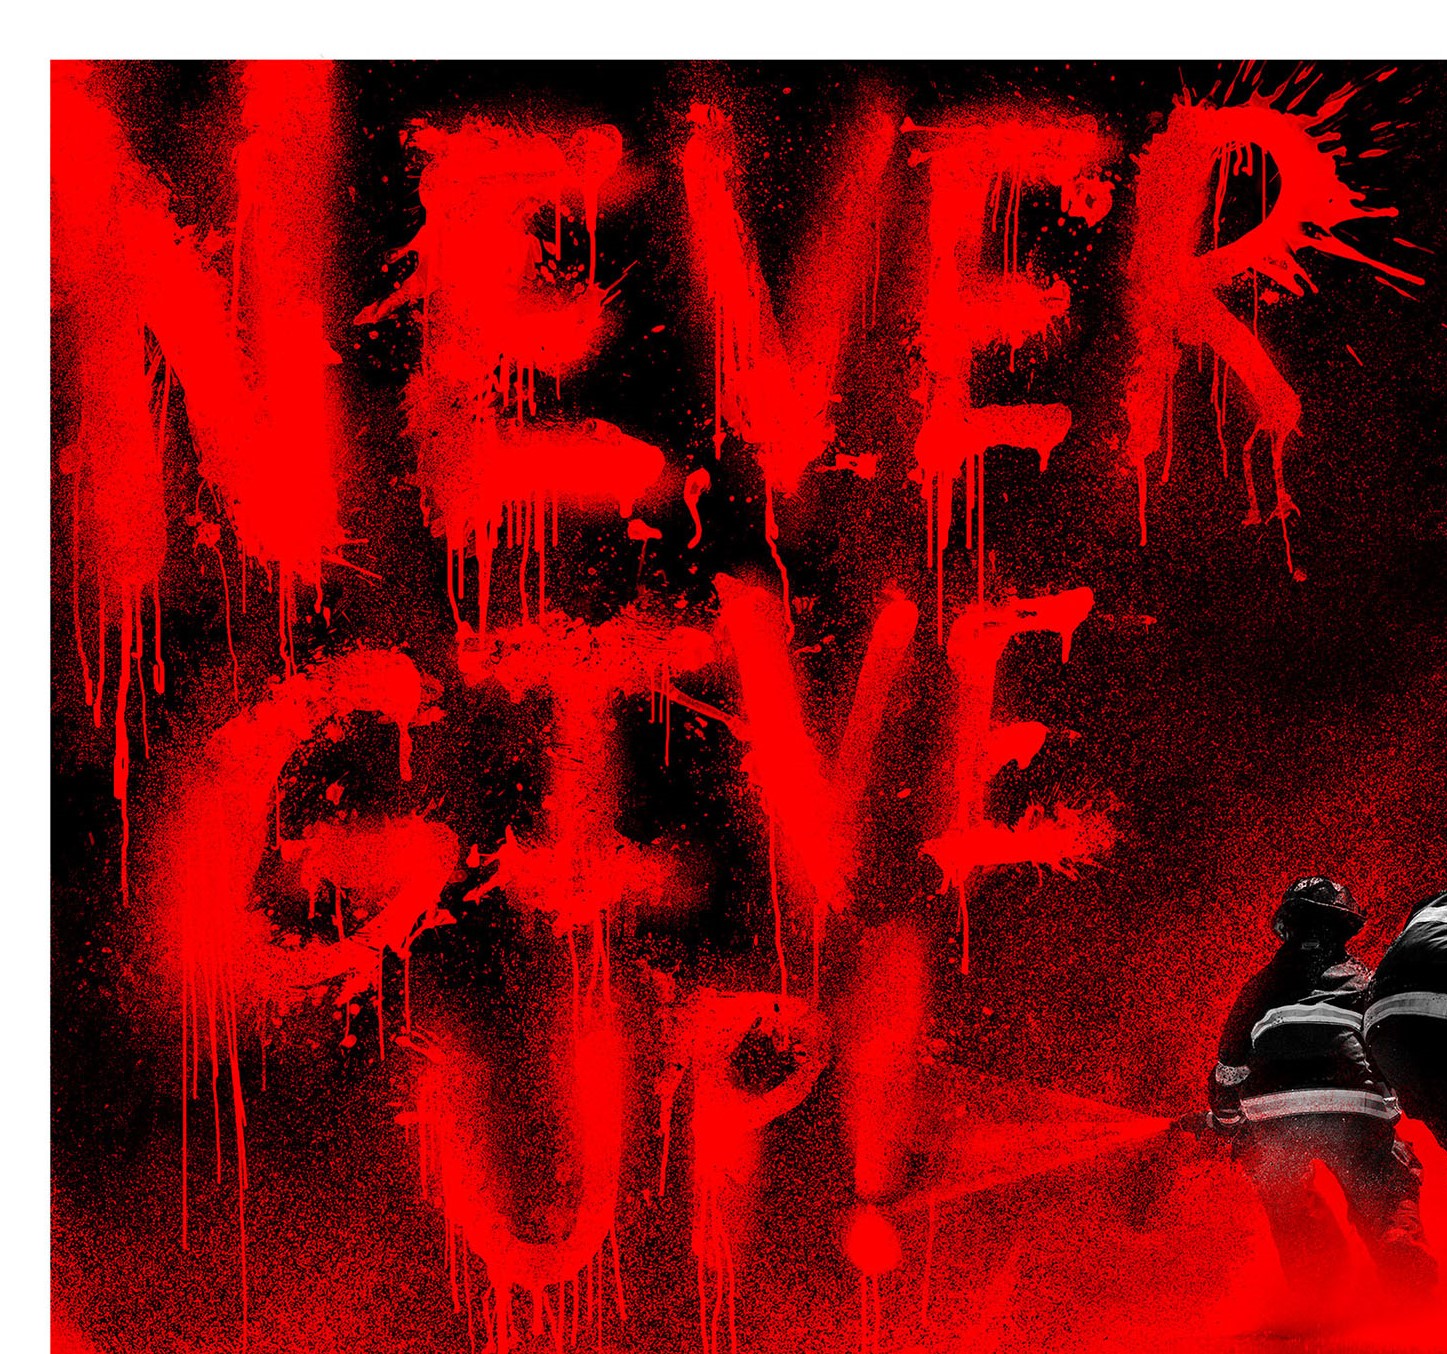 Title:  Never Give Up!  (2018 RED EDITION )  Artist:  Mr. Brainwash  Edition:  Limited RED Edition screenprint on hand torn archival art paper of only 40 copies per color. Signed, numbered and thumb printed on the back.  Type:  Screenprint poster on hand torn archival art paper  Size:  22.4" x 26.4"  Notes:  Released in honor of the Los Angeles Firefighters in regards to the recent Woosley fires that have devastated Southern California.